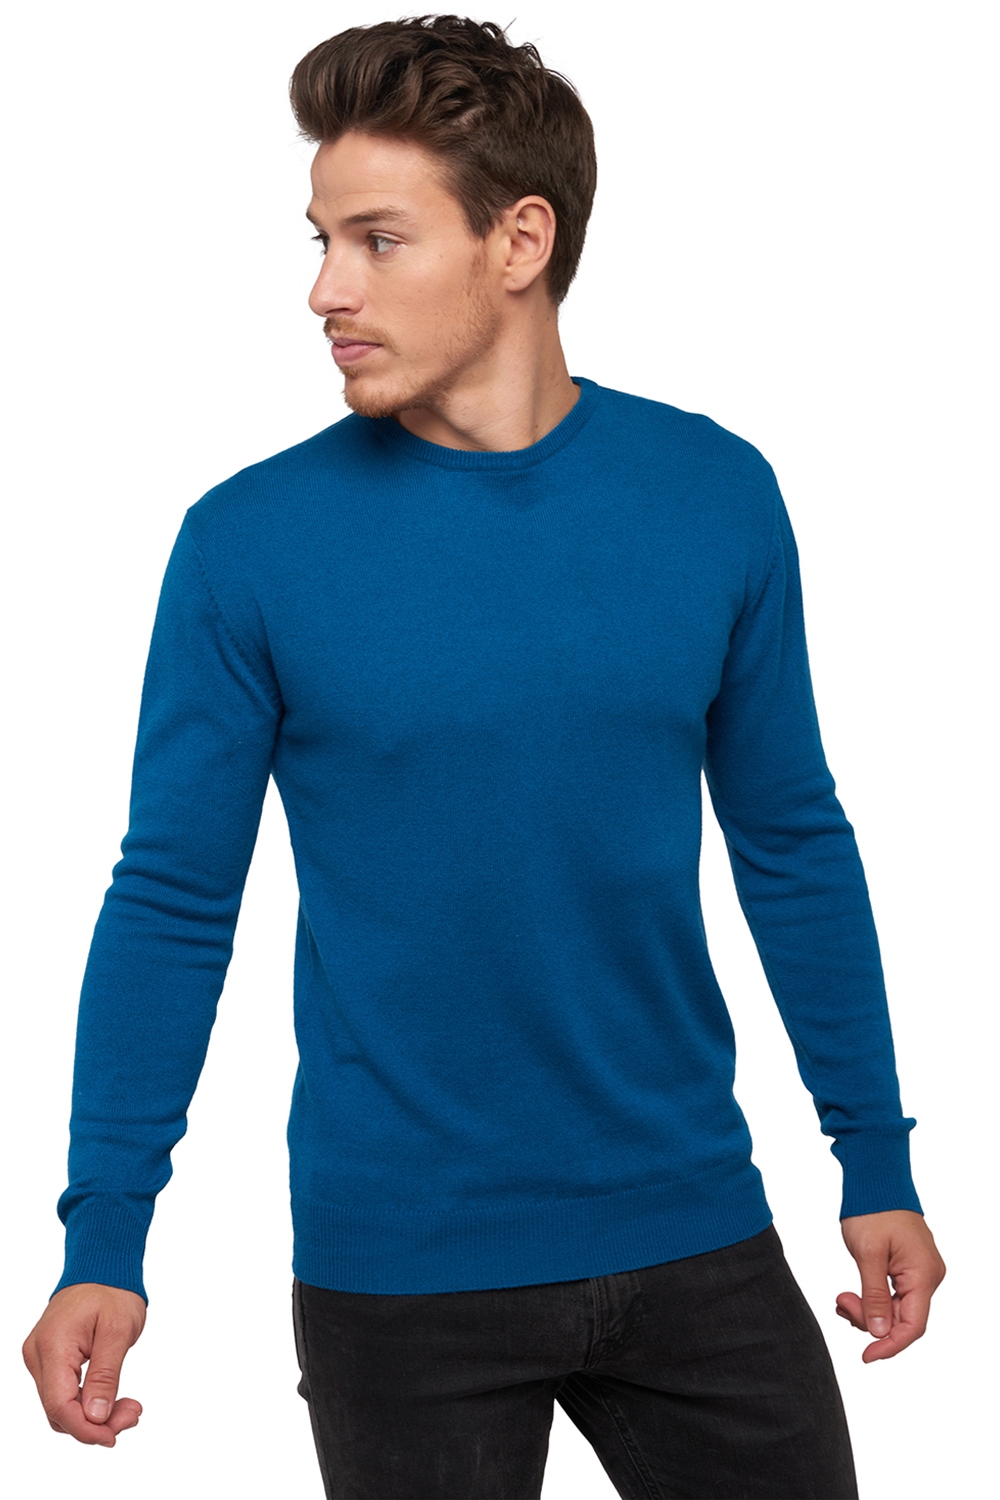 Cachemire pull homme col rond keaton bleu canard s